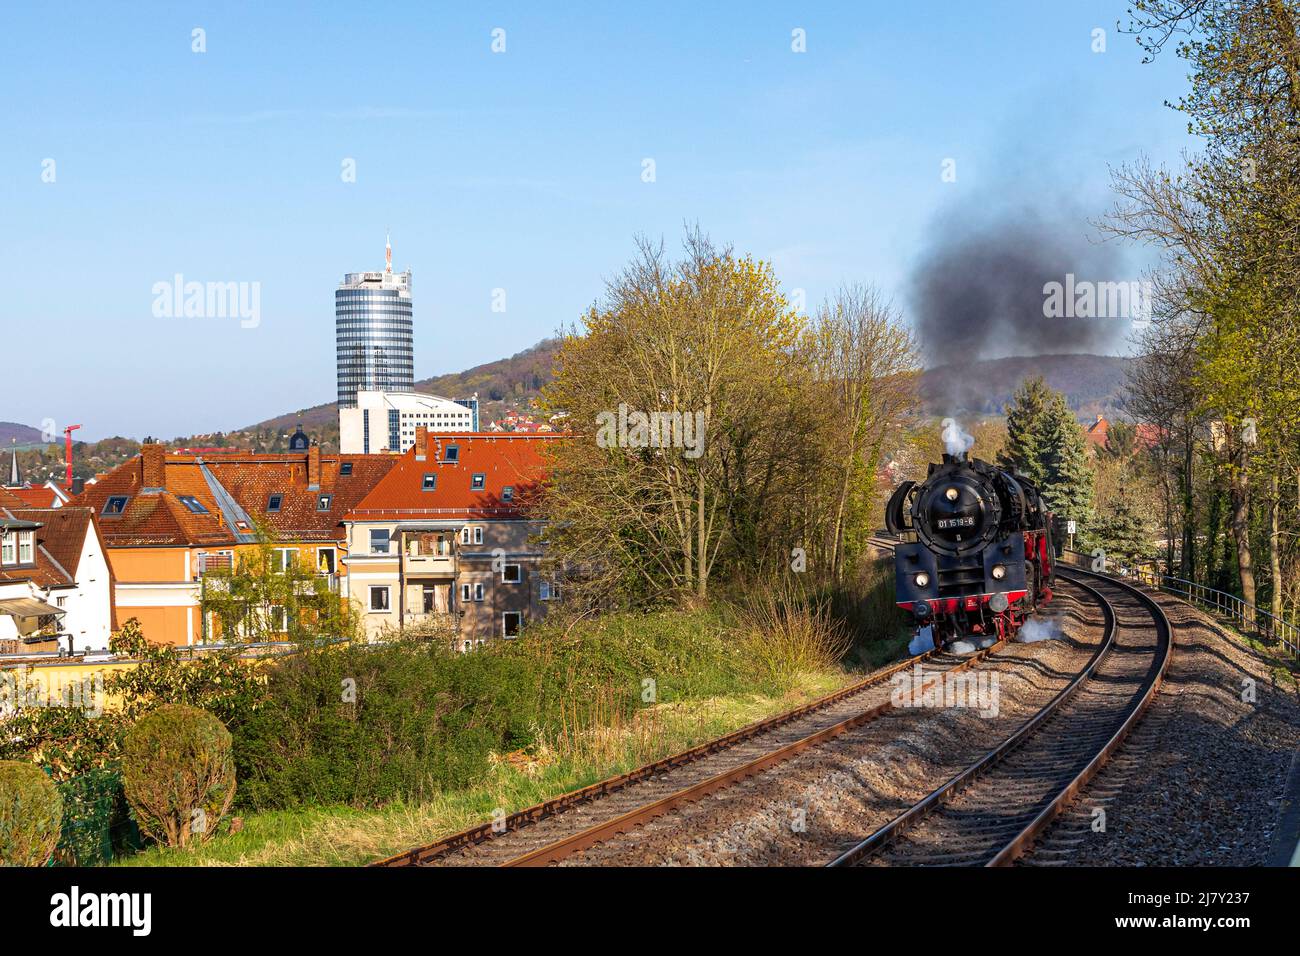 Special Train With Steam Locomotive 01 1519 In Jena With The Jentower In The Background, Thuringia, Germany, Europe Stock Photo